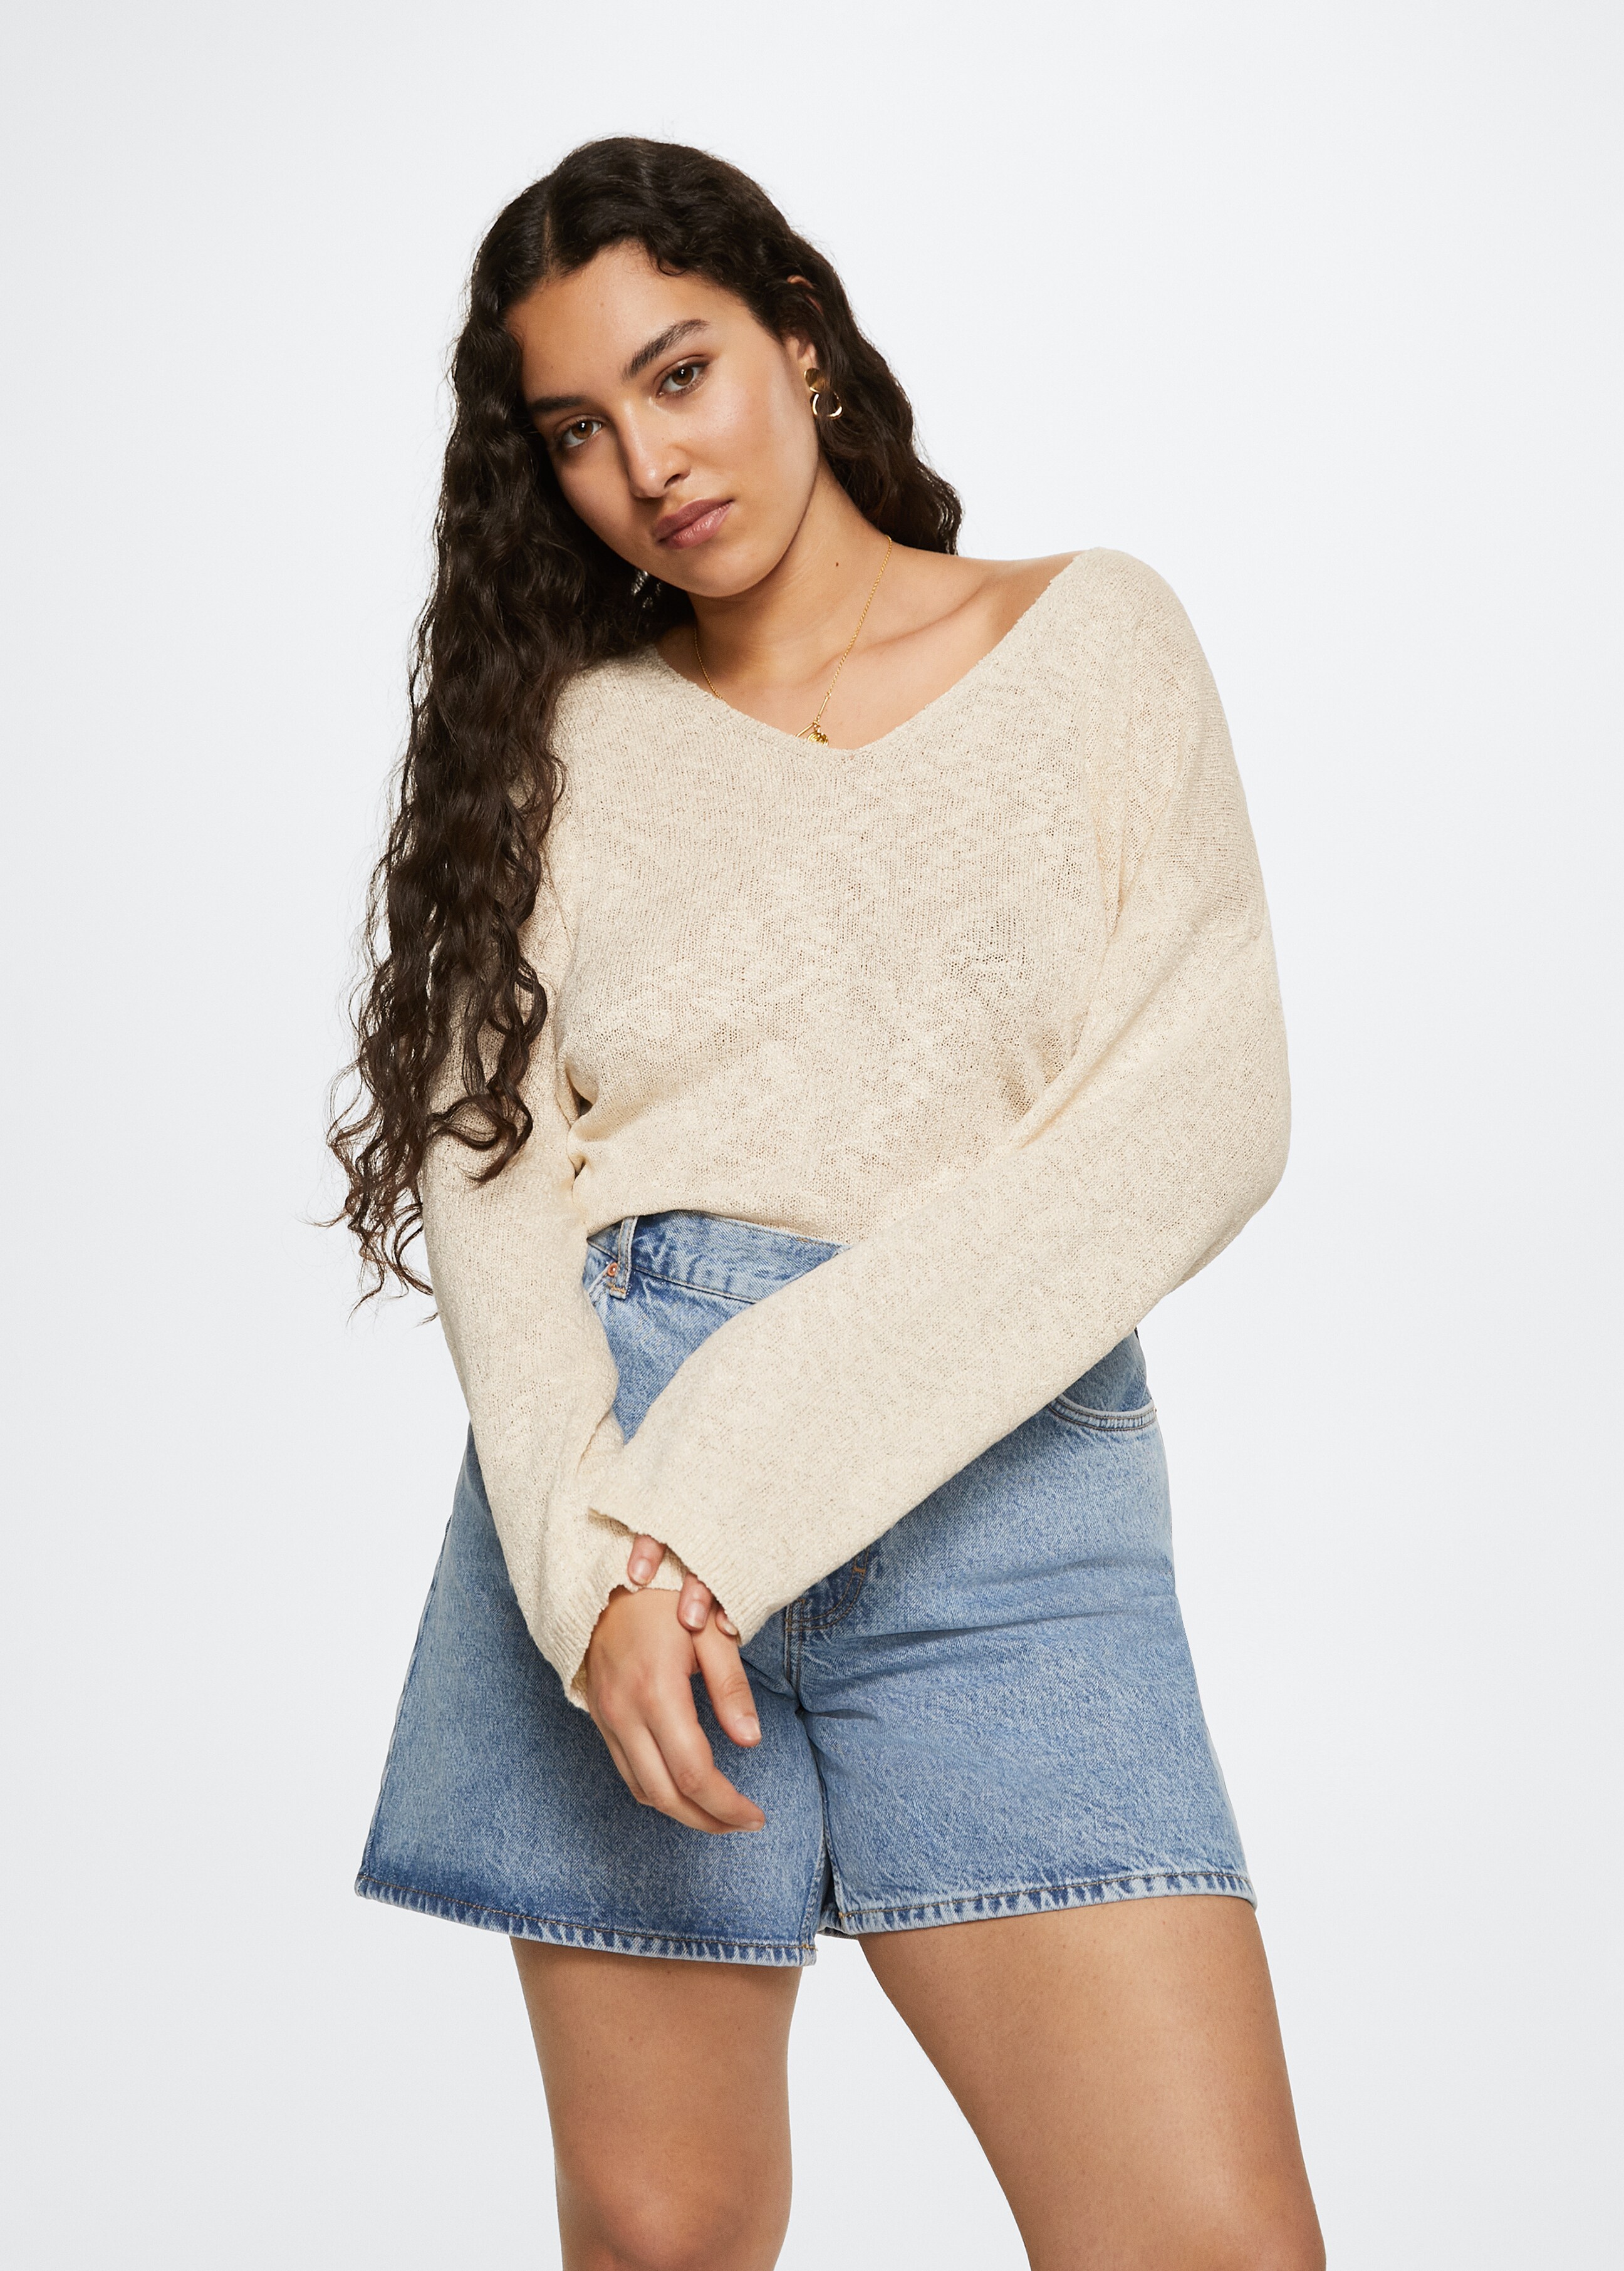 V-neck knit sweater - Details of the article 3